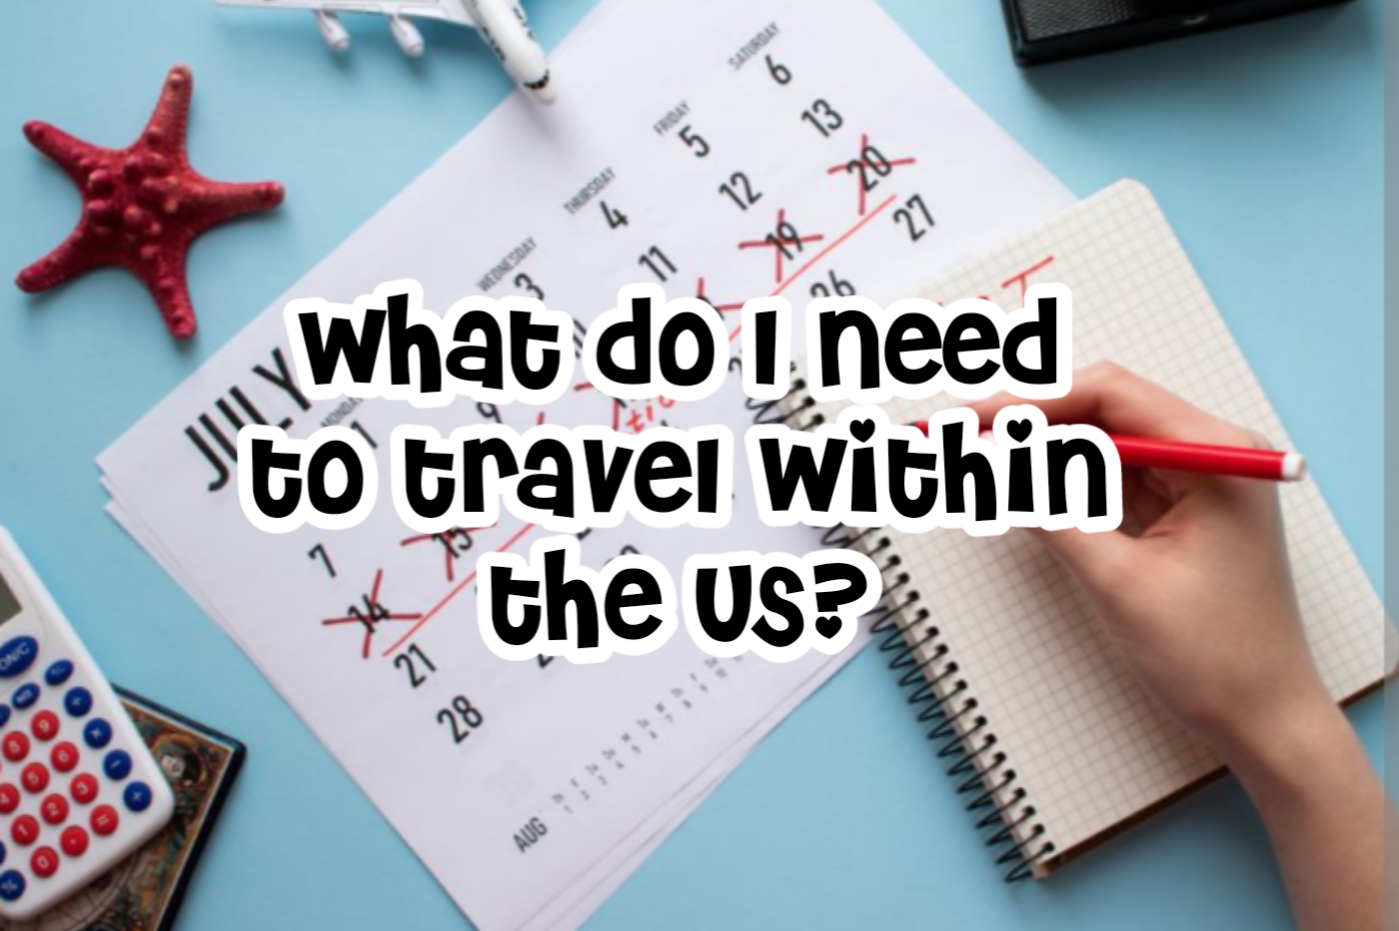 What do I need to travel within the US?